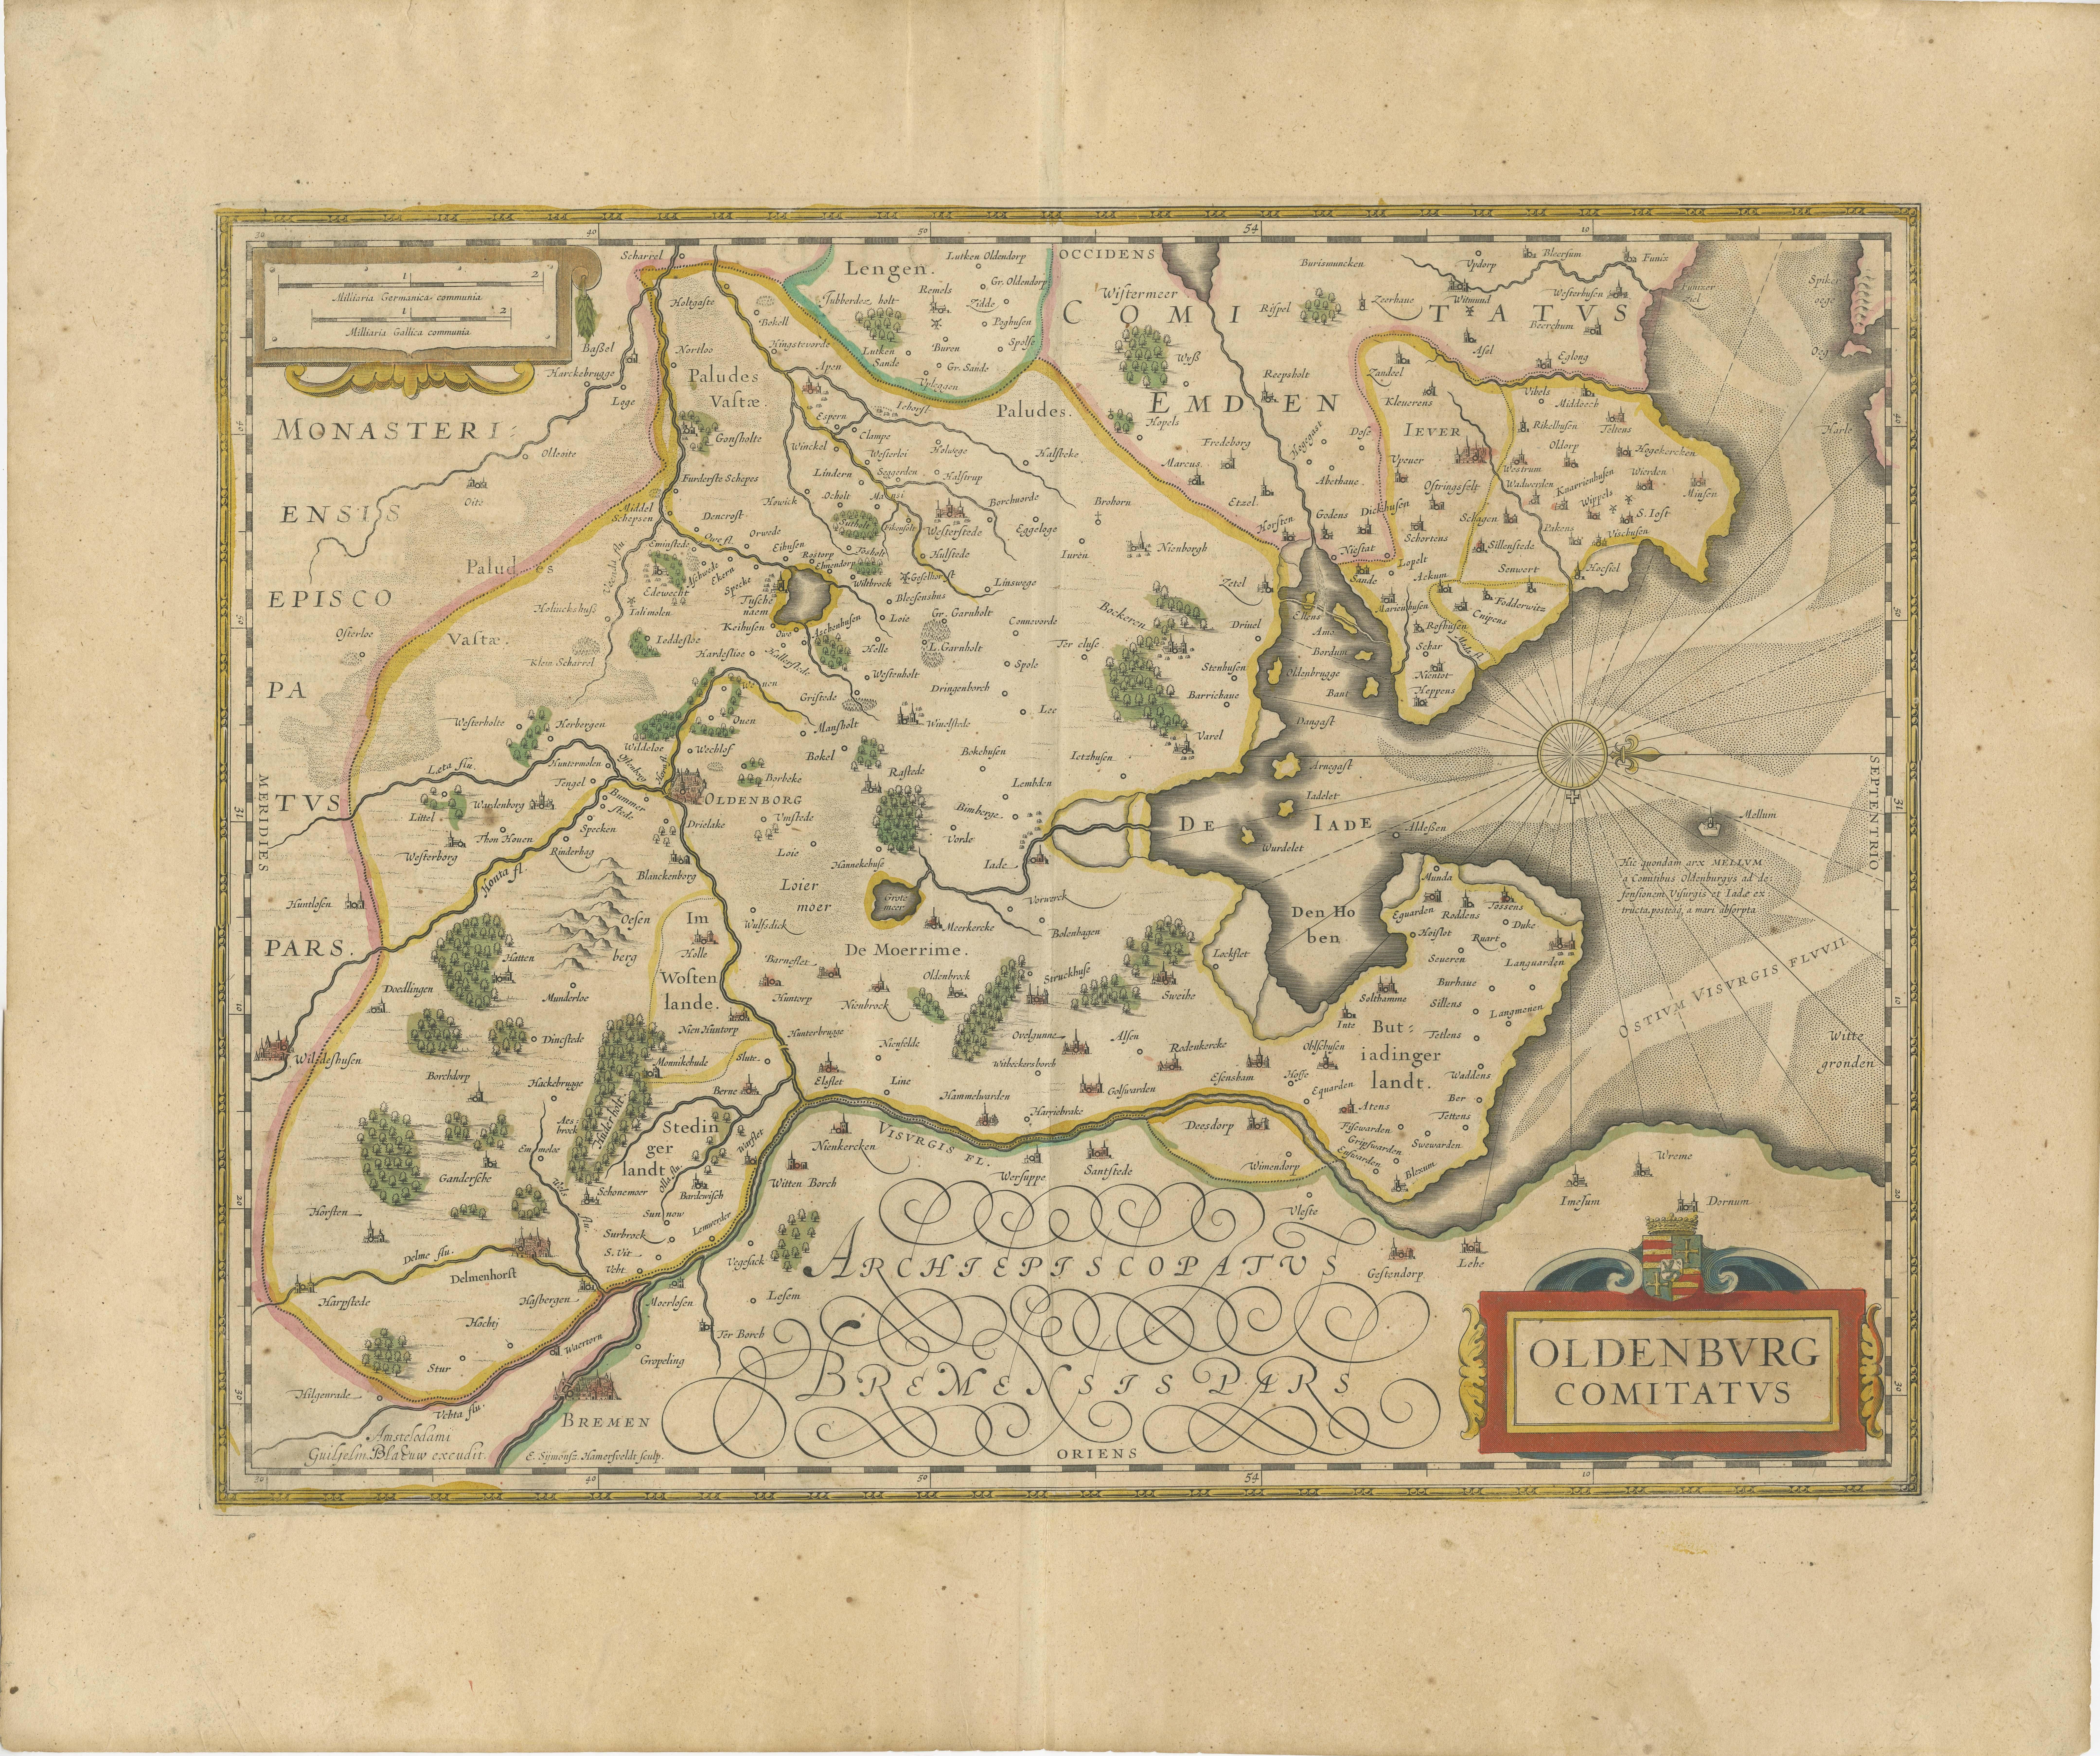 Antique map titled 'Oldenburg Comitatus'. Detailed old map of Oldenburg, Germany. The map also shows Bremen and the Jade Bight. Published by W. Blaeu, circa 1640. Willem Jansz. Blaeu and his son Joan Blaeu are the most widely known cartographic